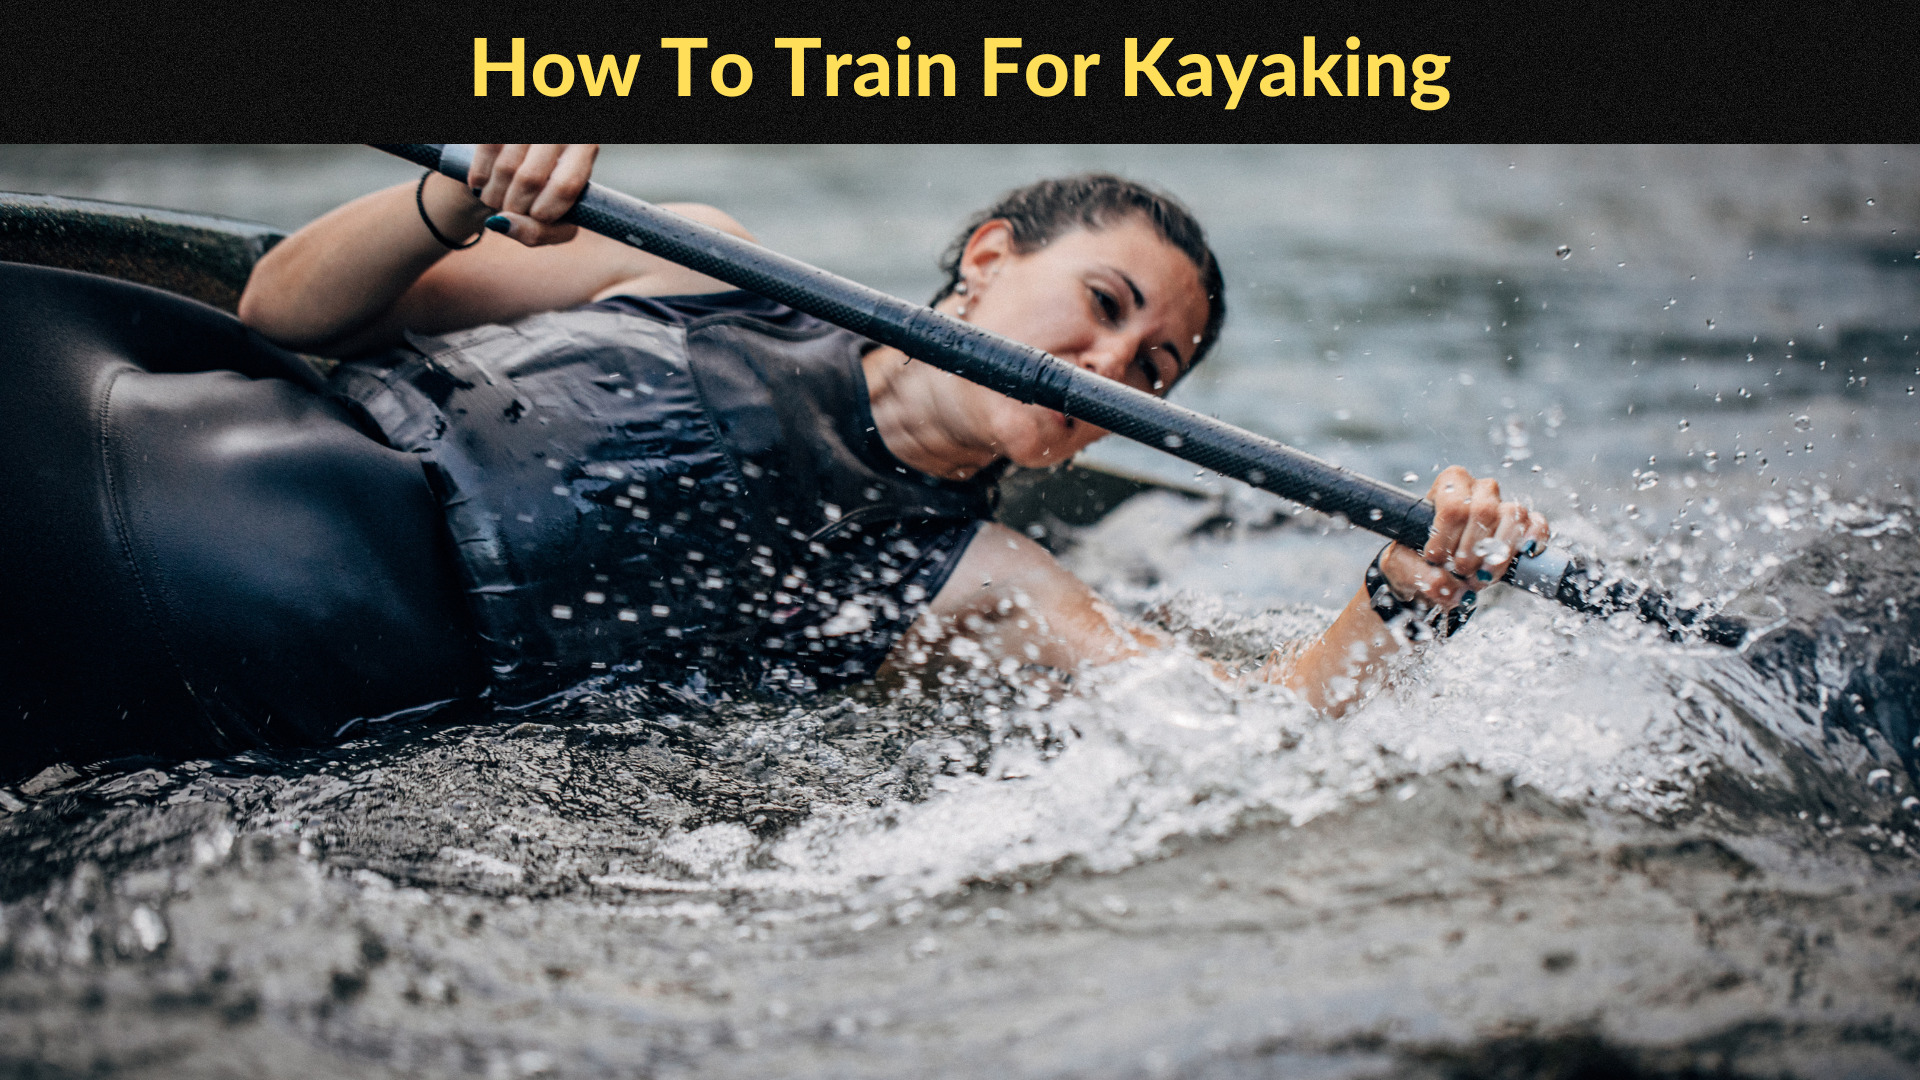 How To Train for Kayaking